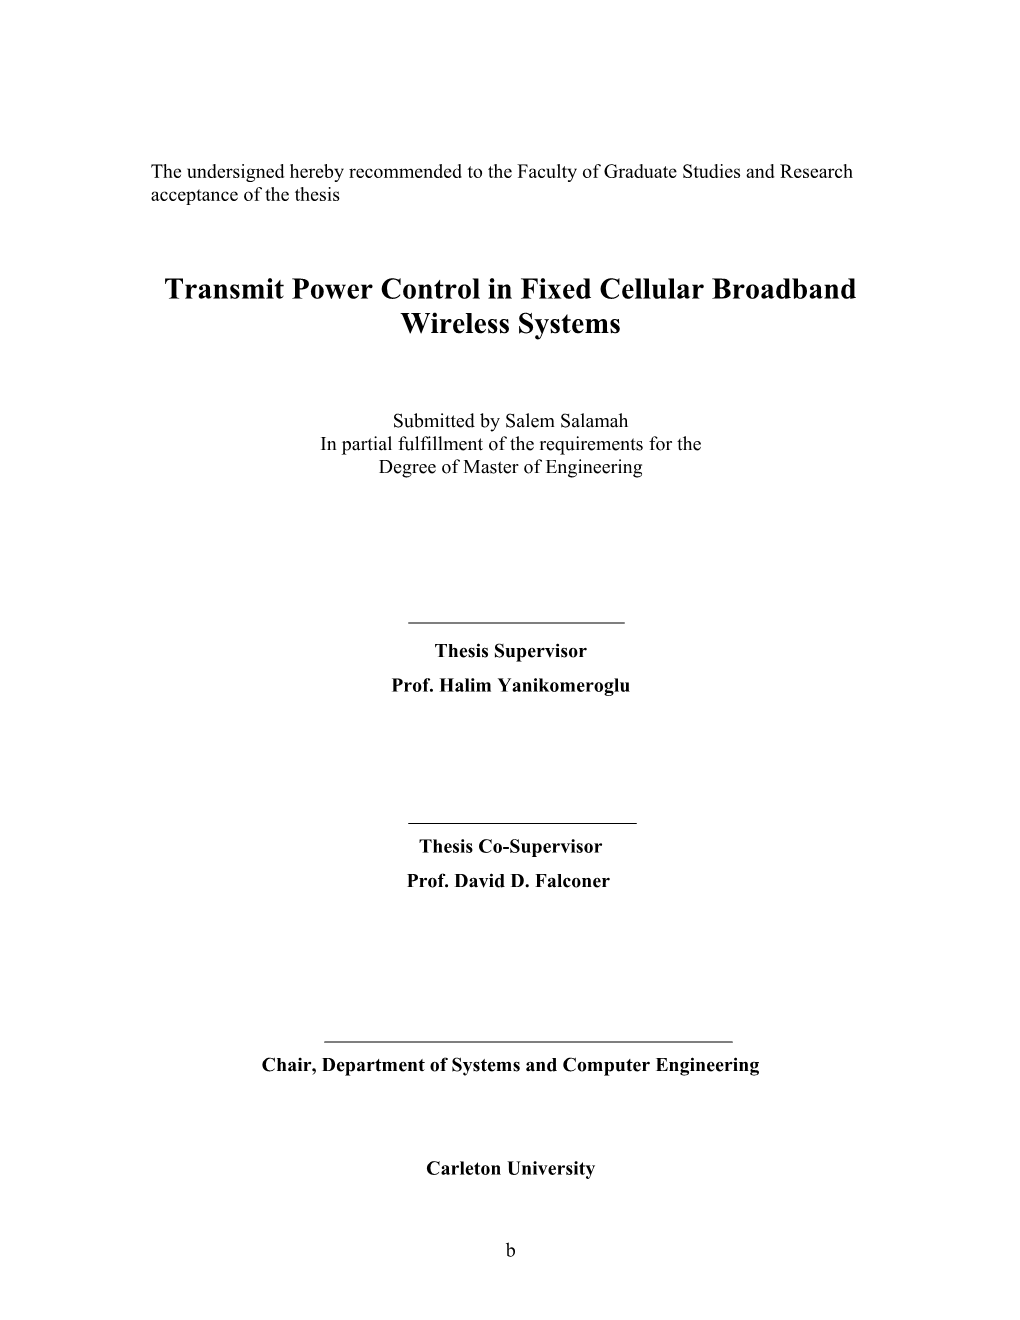 Transmit Power Control in Fixed Cellular Broadband Wireless Systems